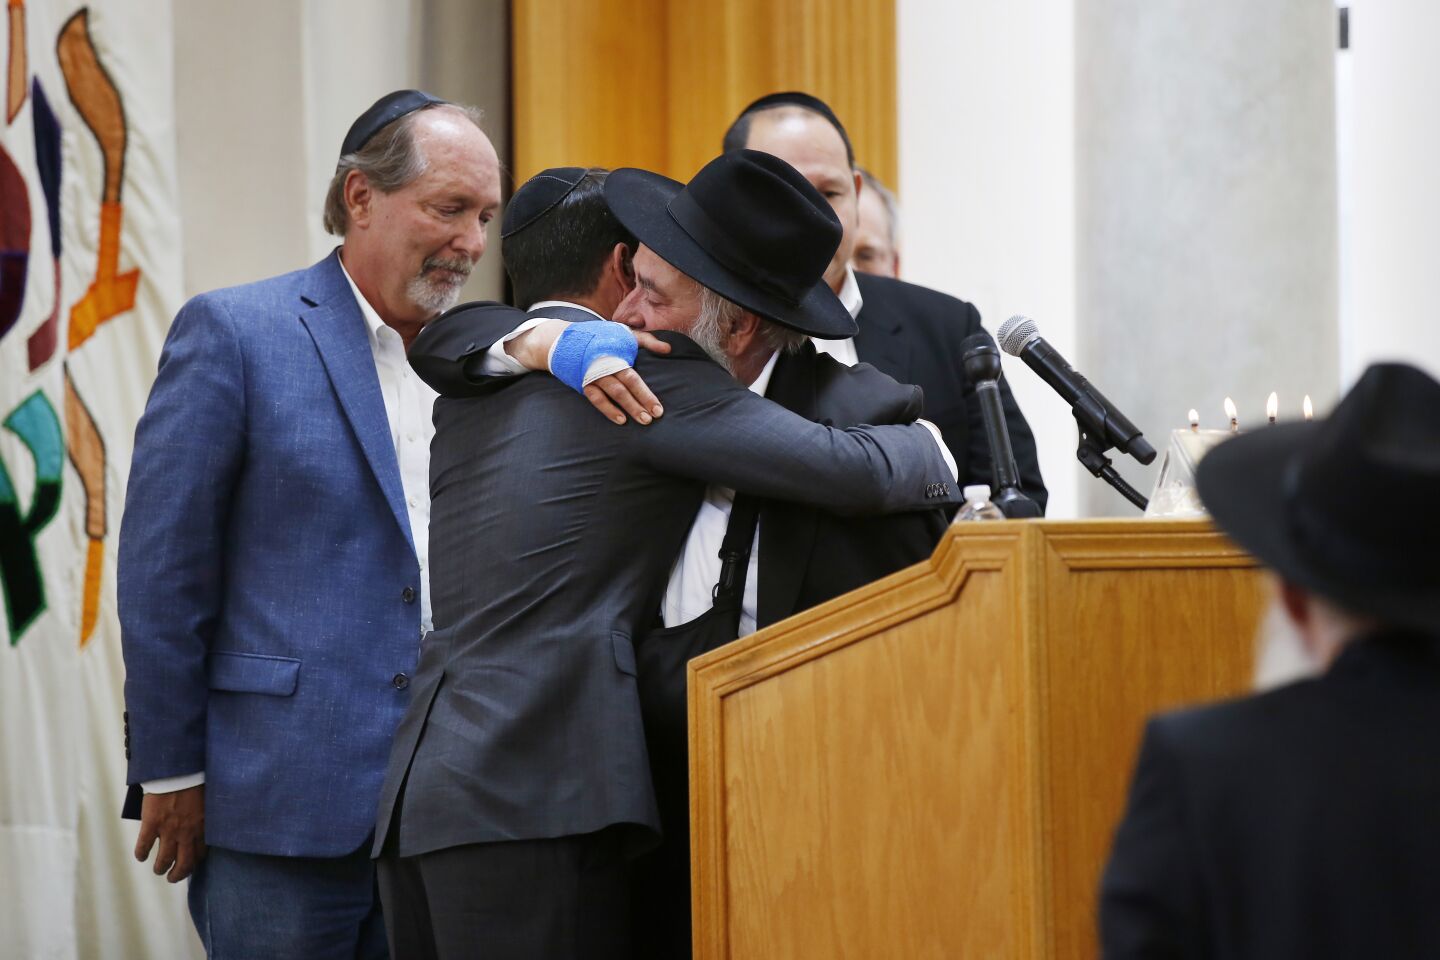 Oscar Stewart, left, who was called a hero in the Poway shooting, is hugged by Rabbi Yisroel Goldstein as Poway Mayor Steve Vaus, left, looks on during a service for Lori Gilbert-Kaye, 60, at the Chabad of Poway on April 28, 2019 in Poway, California. Gilbert-Kaye was killed by a gunman at the synagogue.